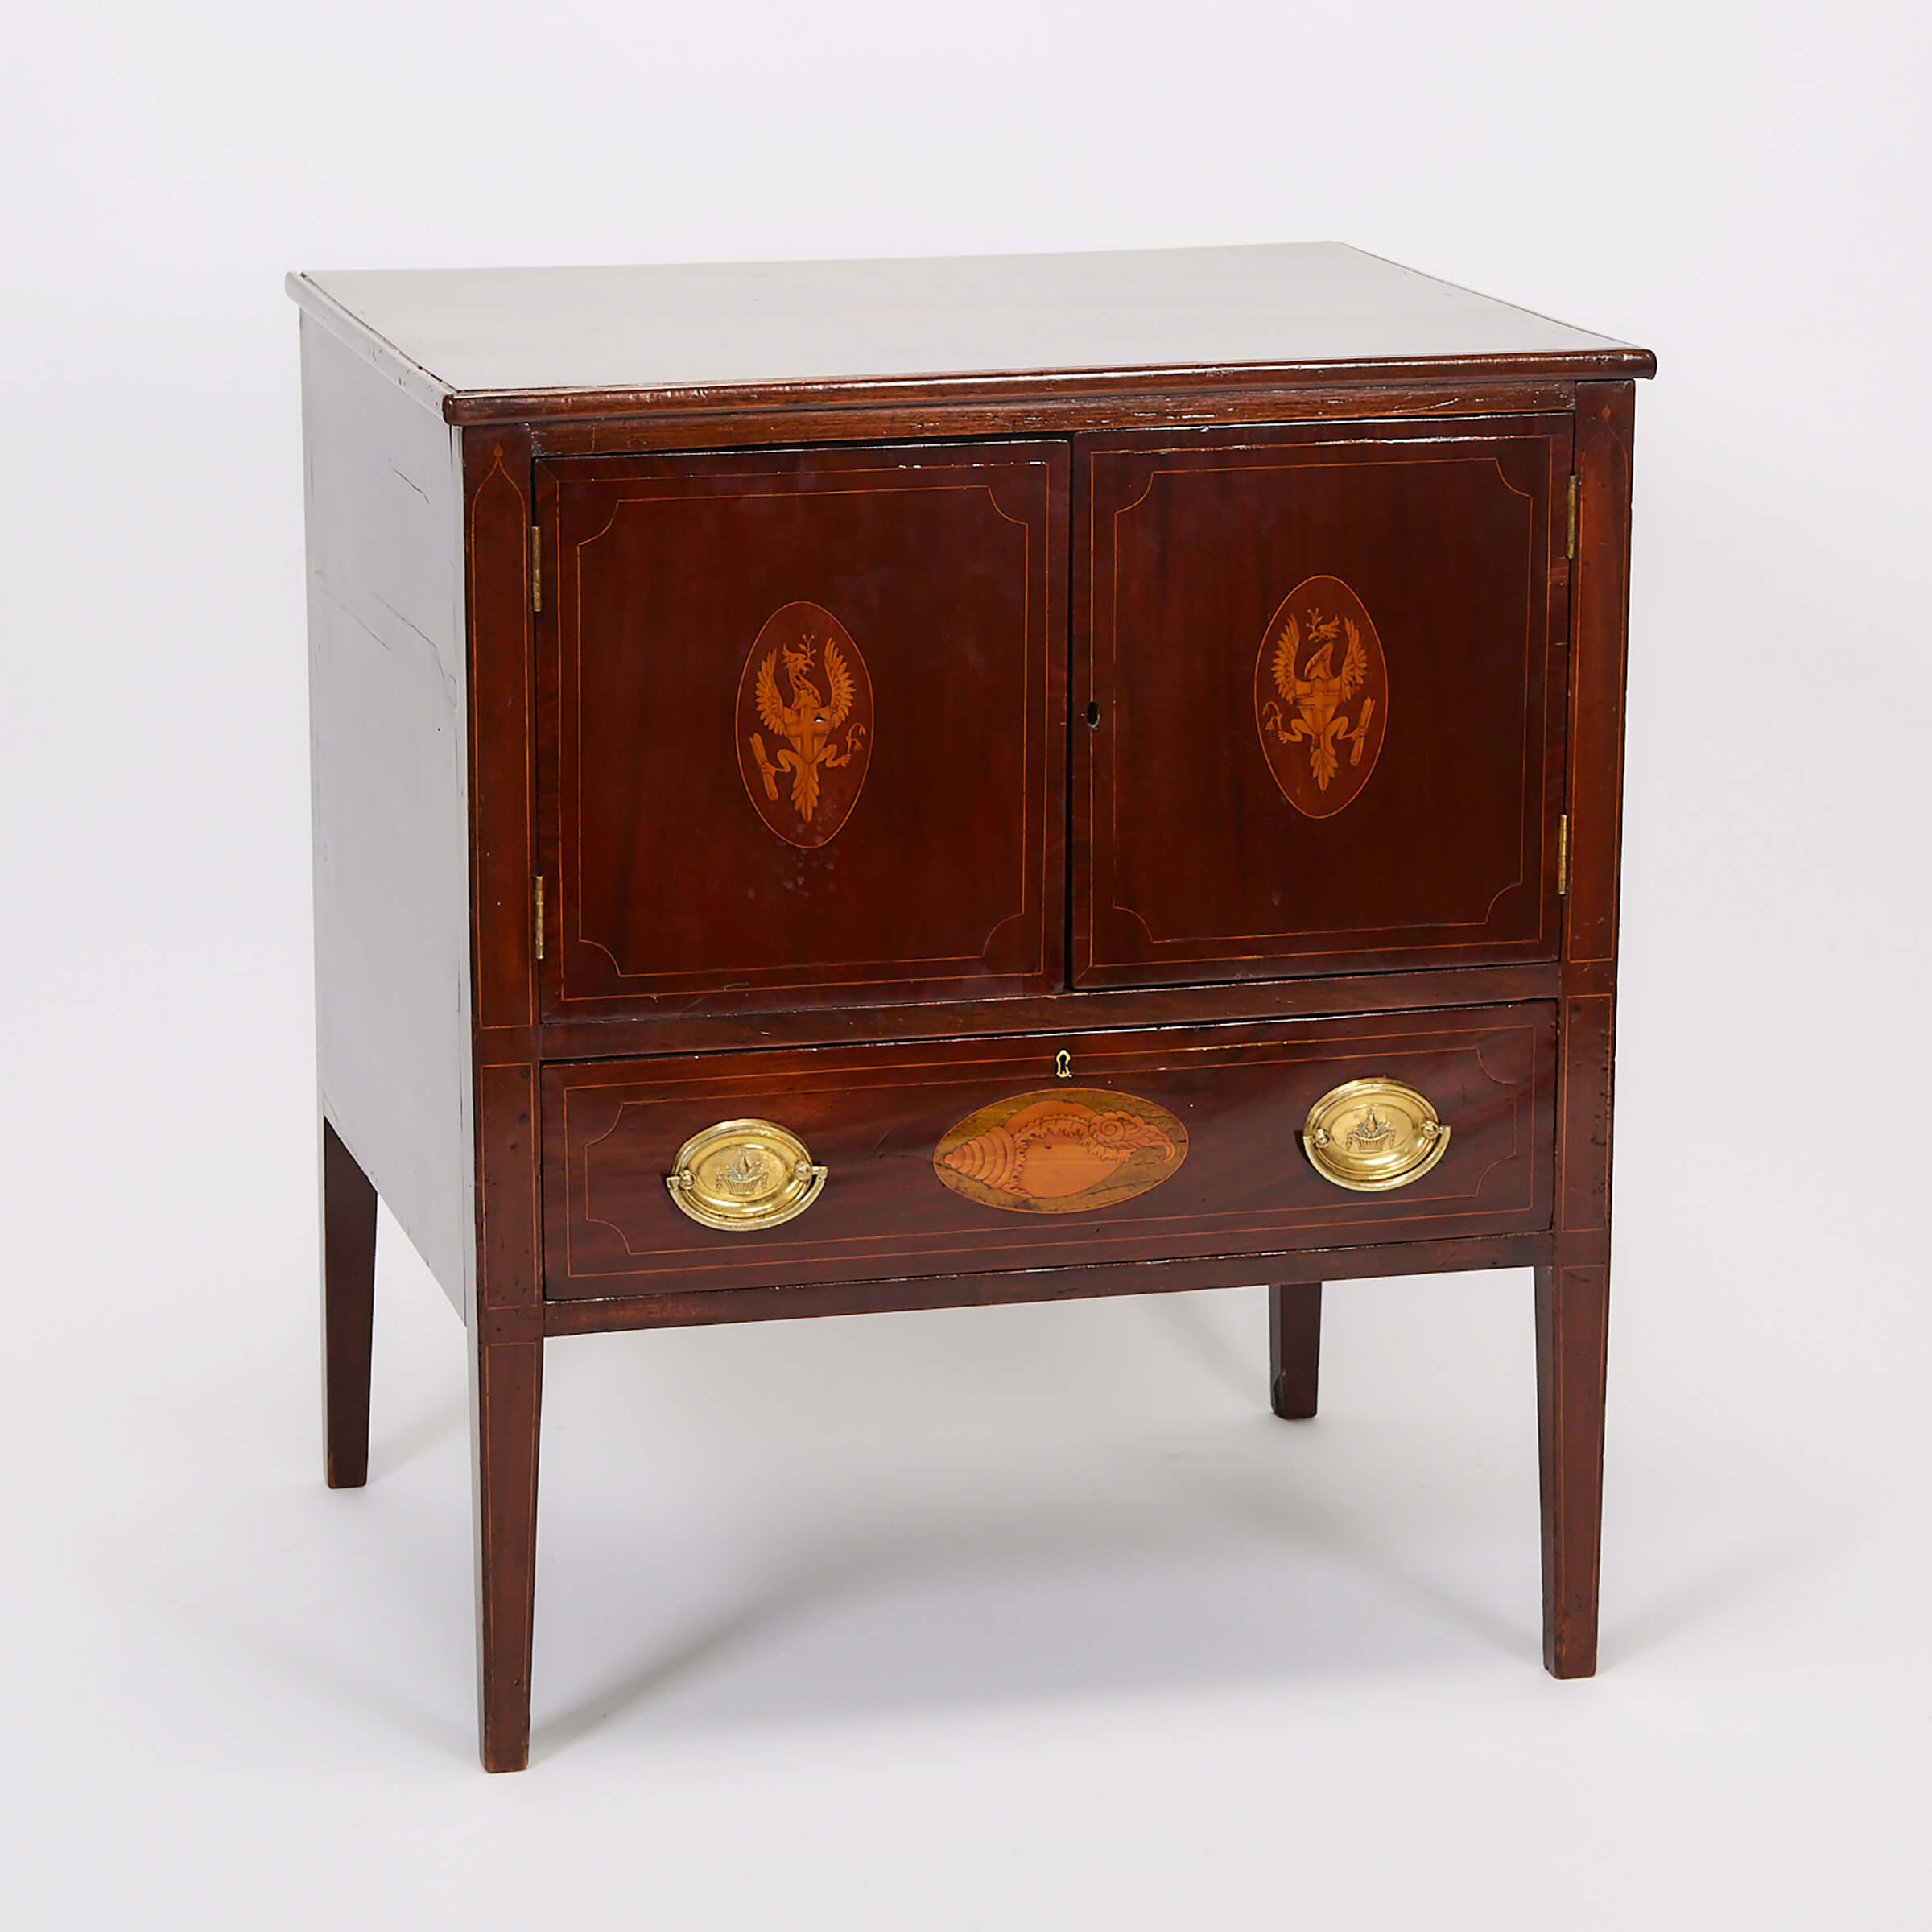 Georgian Inlaid Mahogany Bedside Cabinet on Stand, c.1800 